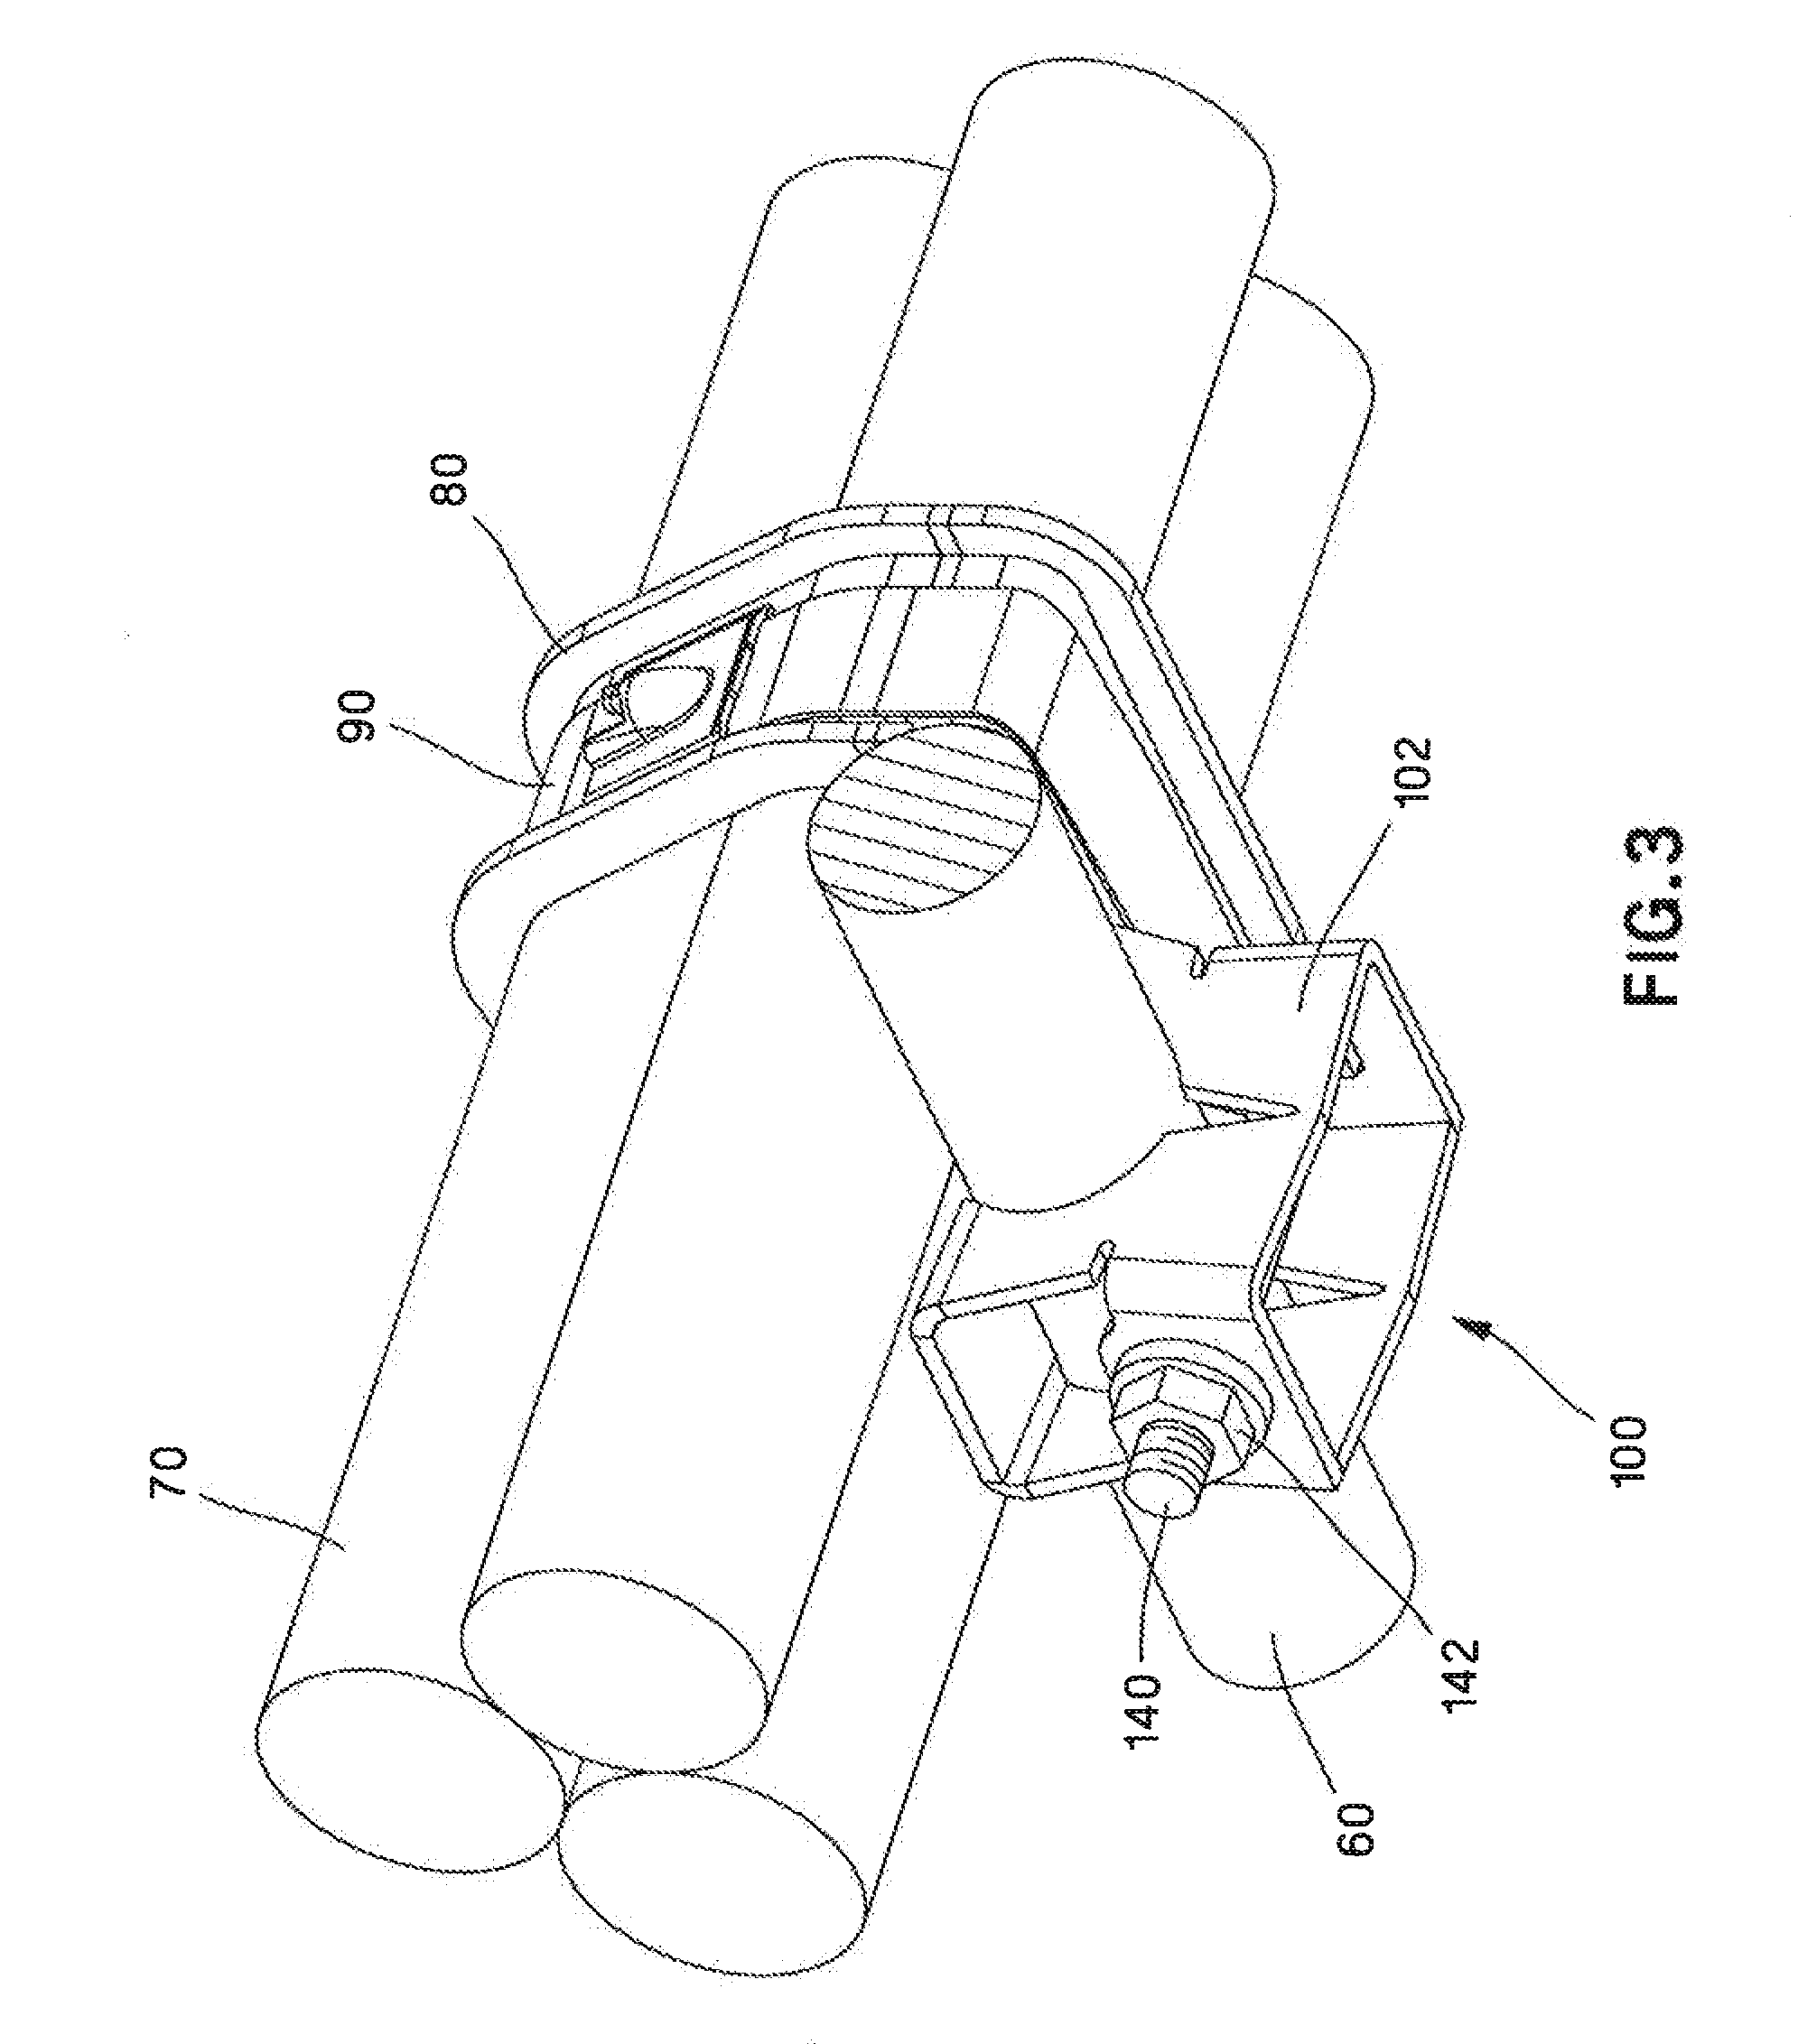 Cradle Clamp Bracket Assembly